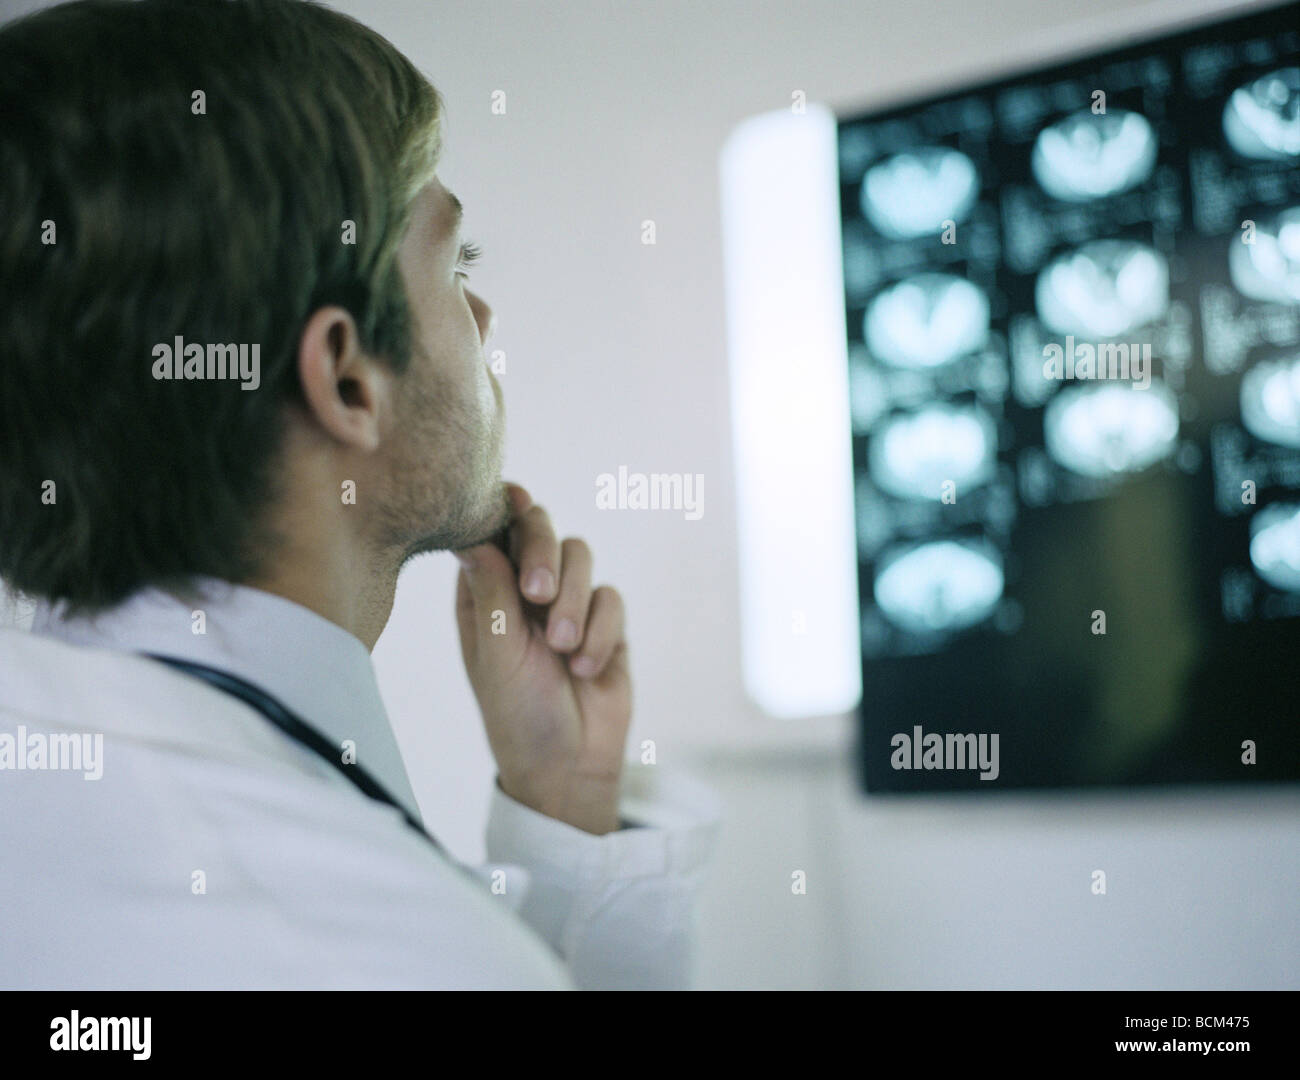 Doctor looking at MRI scans, hand under chin Stock Photo